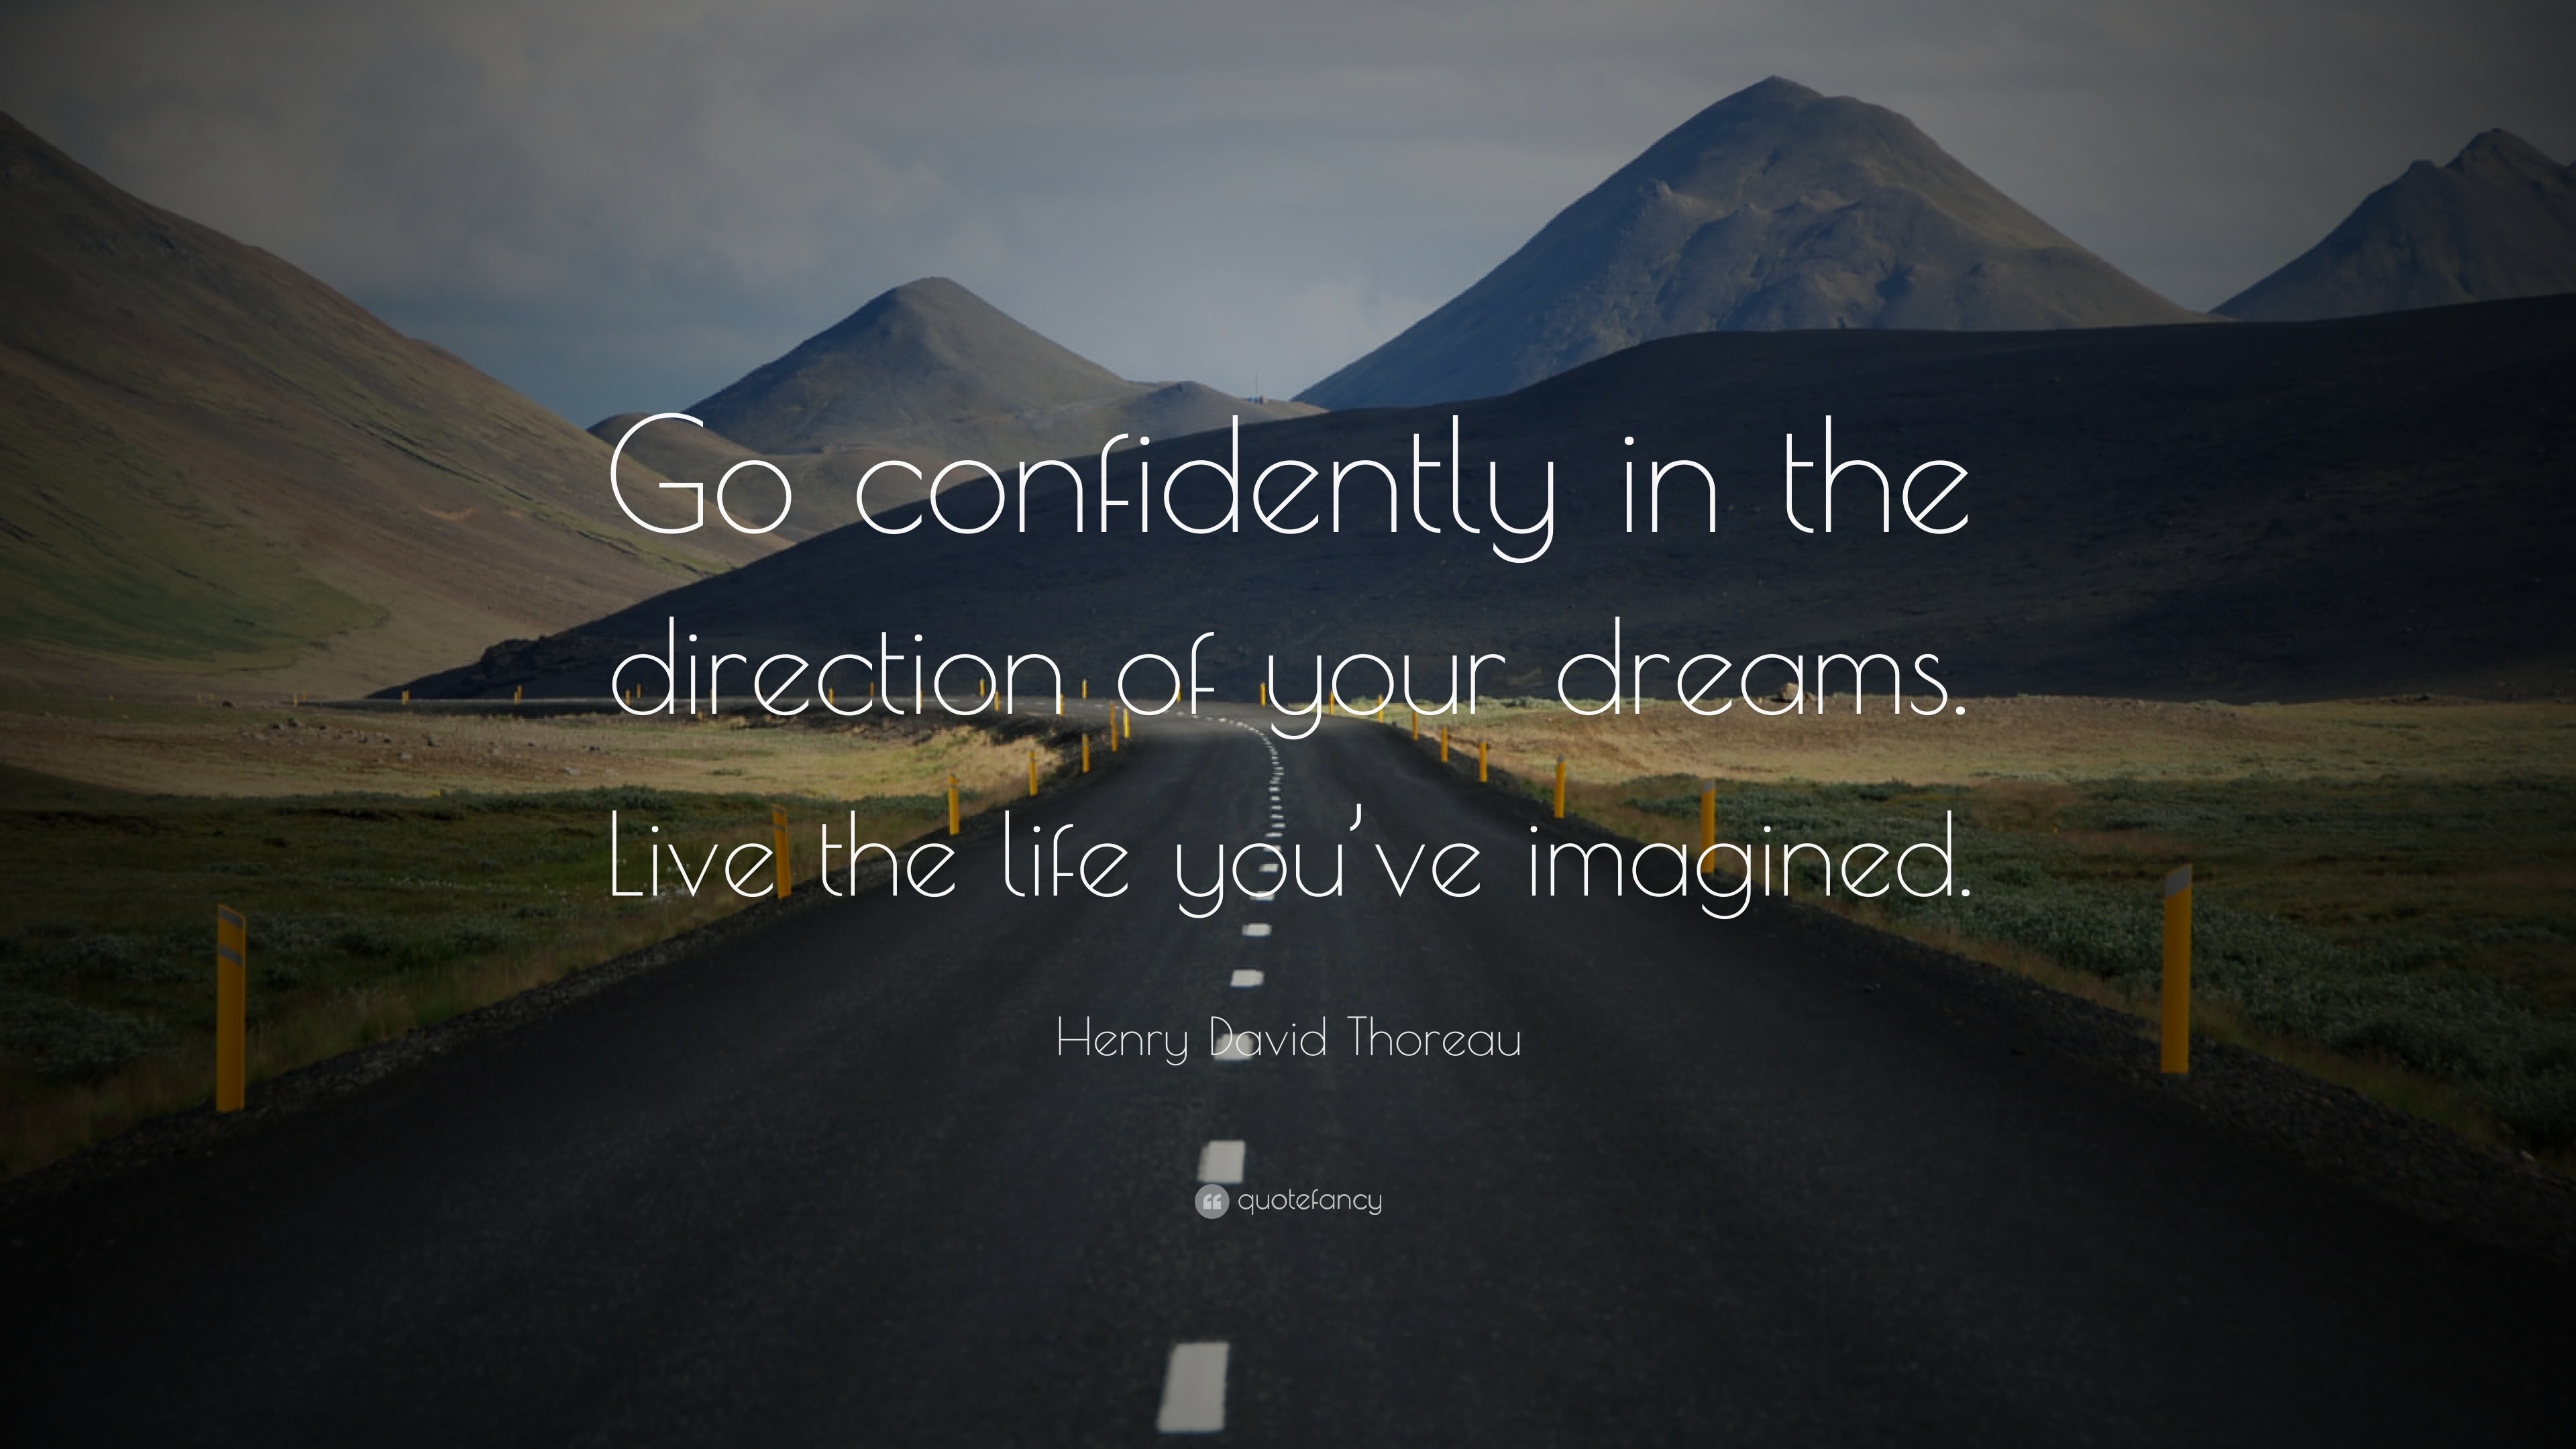 Henry David Thoreau Quote Go Confidently In The Direction Of Your Dreams Live The Life You